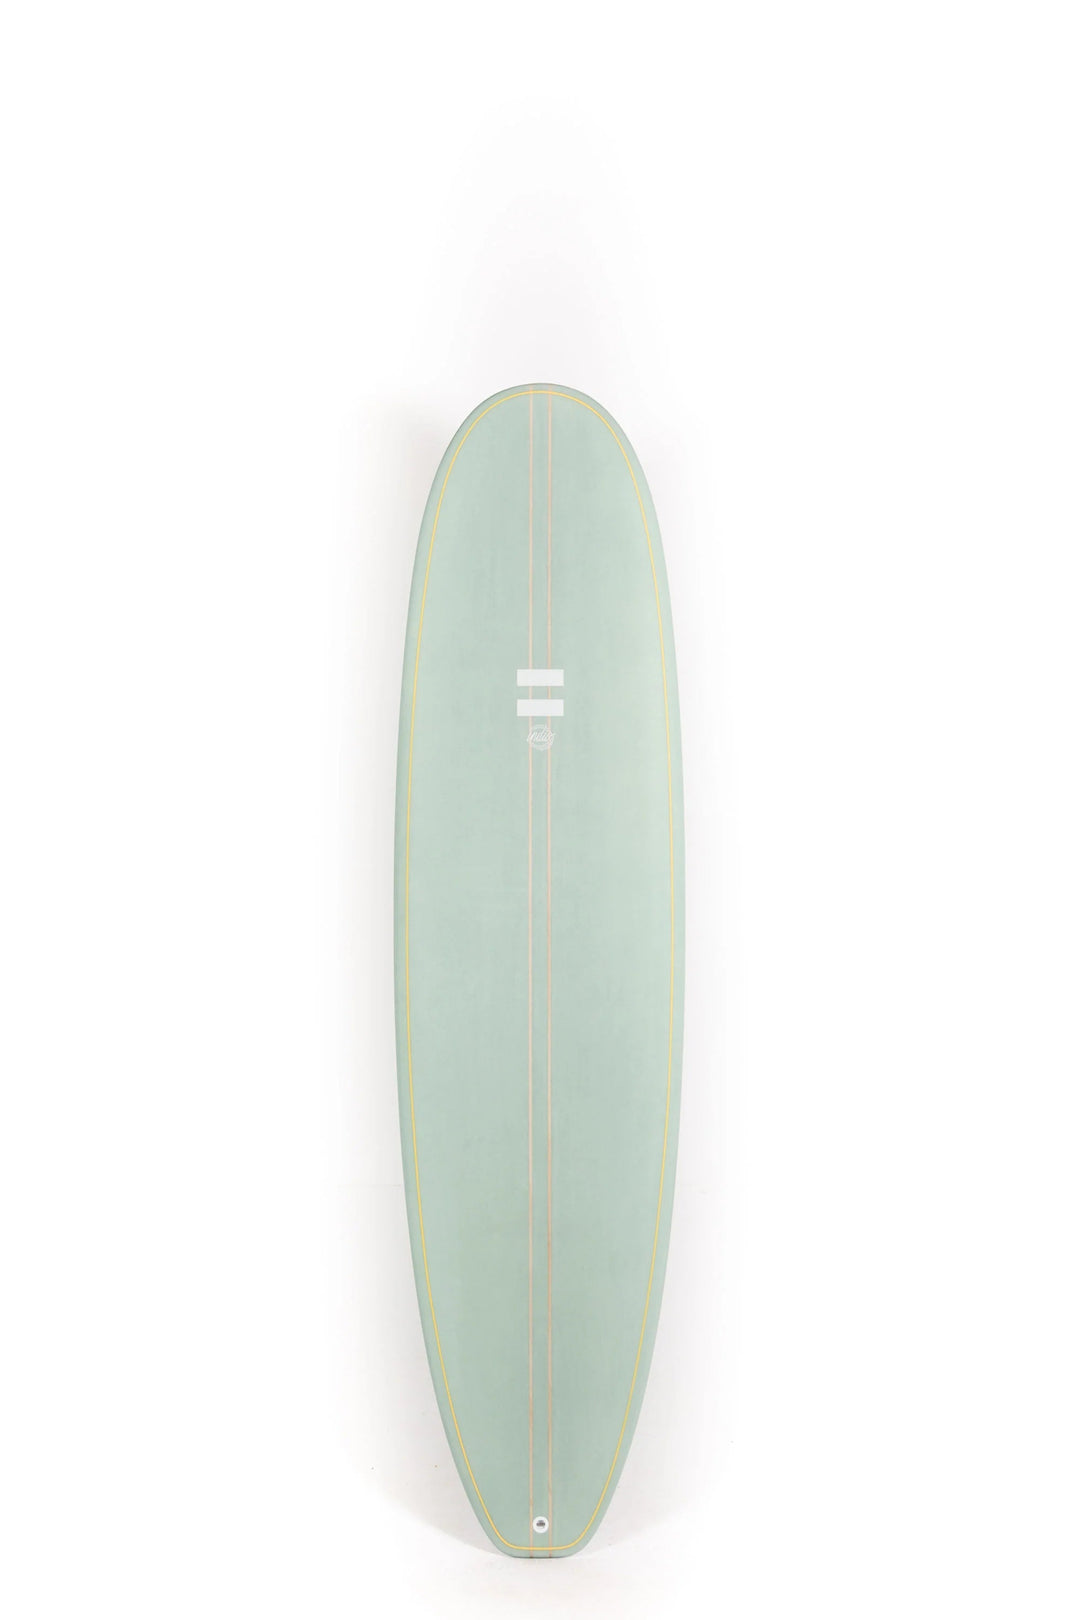 Indio Surfboards Mid Length 7'0" - MInt